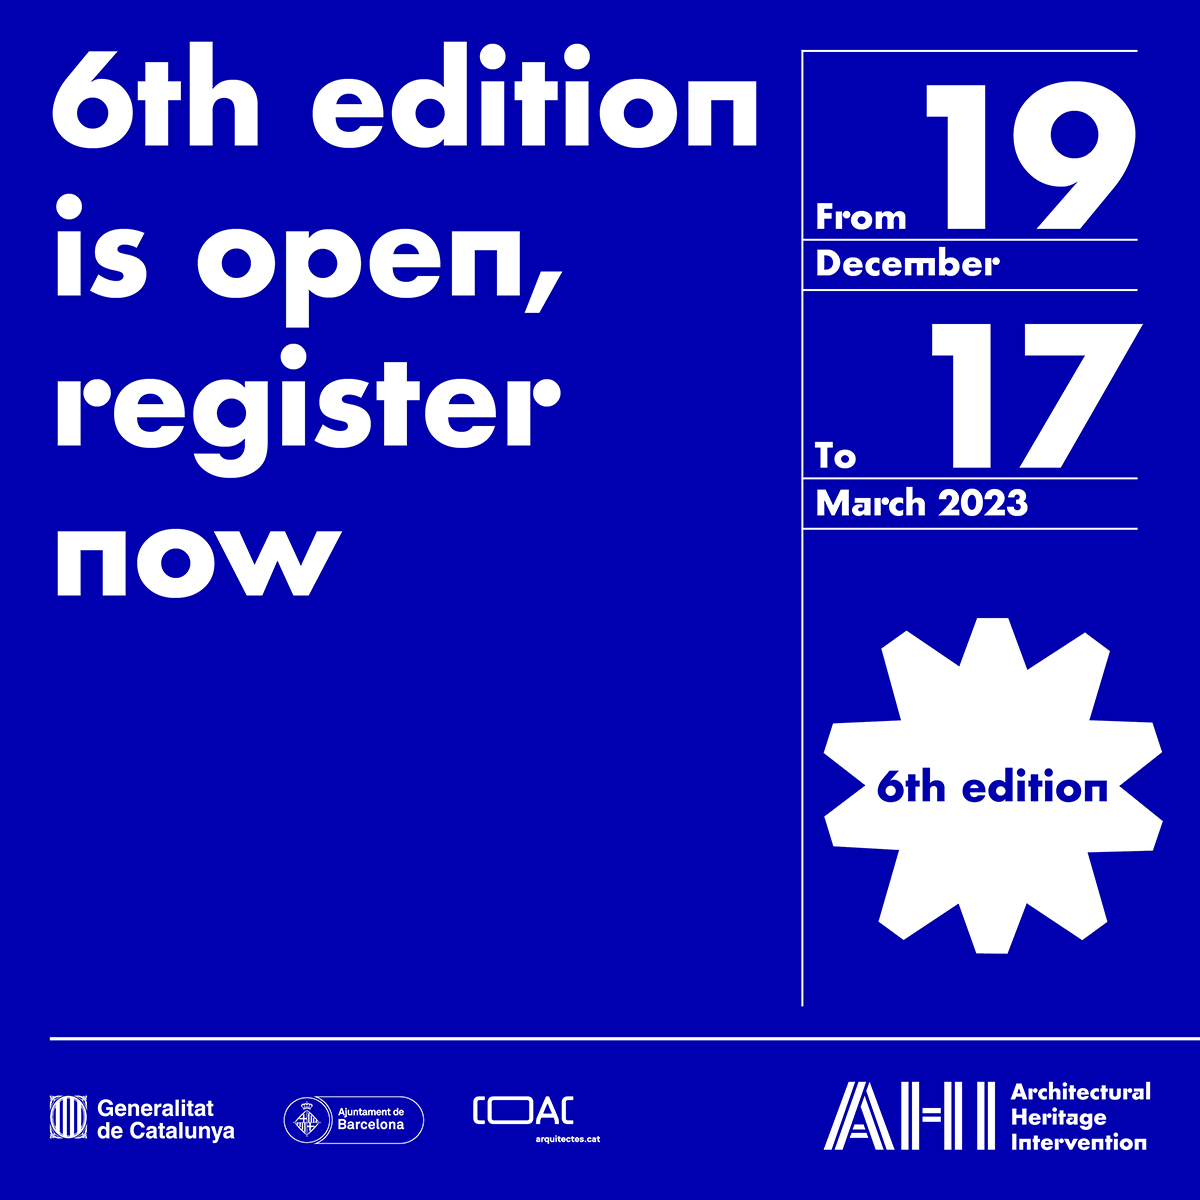 6th edition of the Award. Registration open